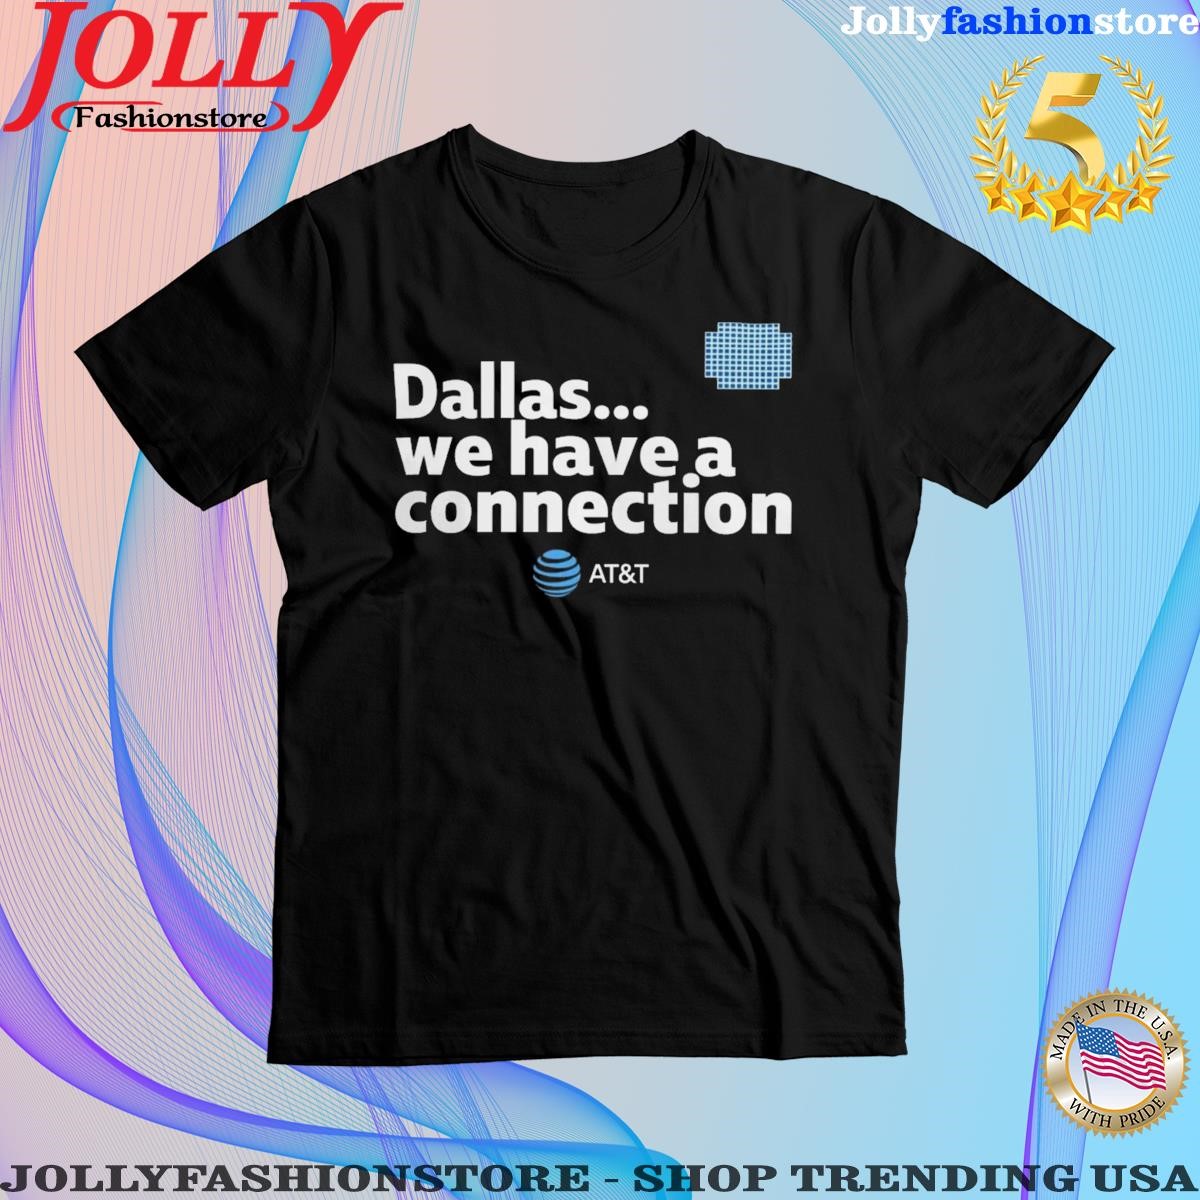 Trending will townsend Dallas we have a connection Shirt